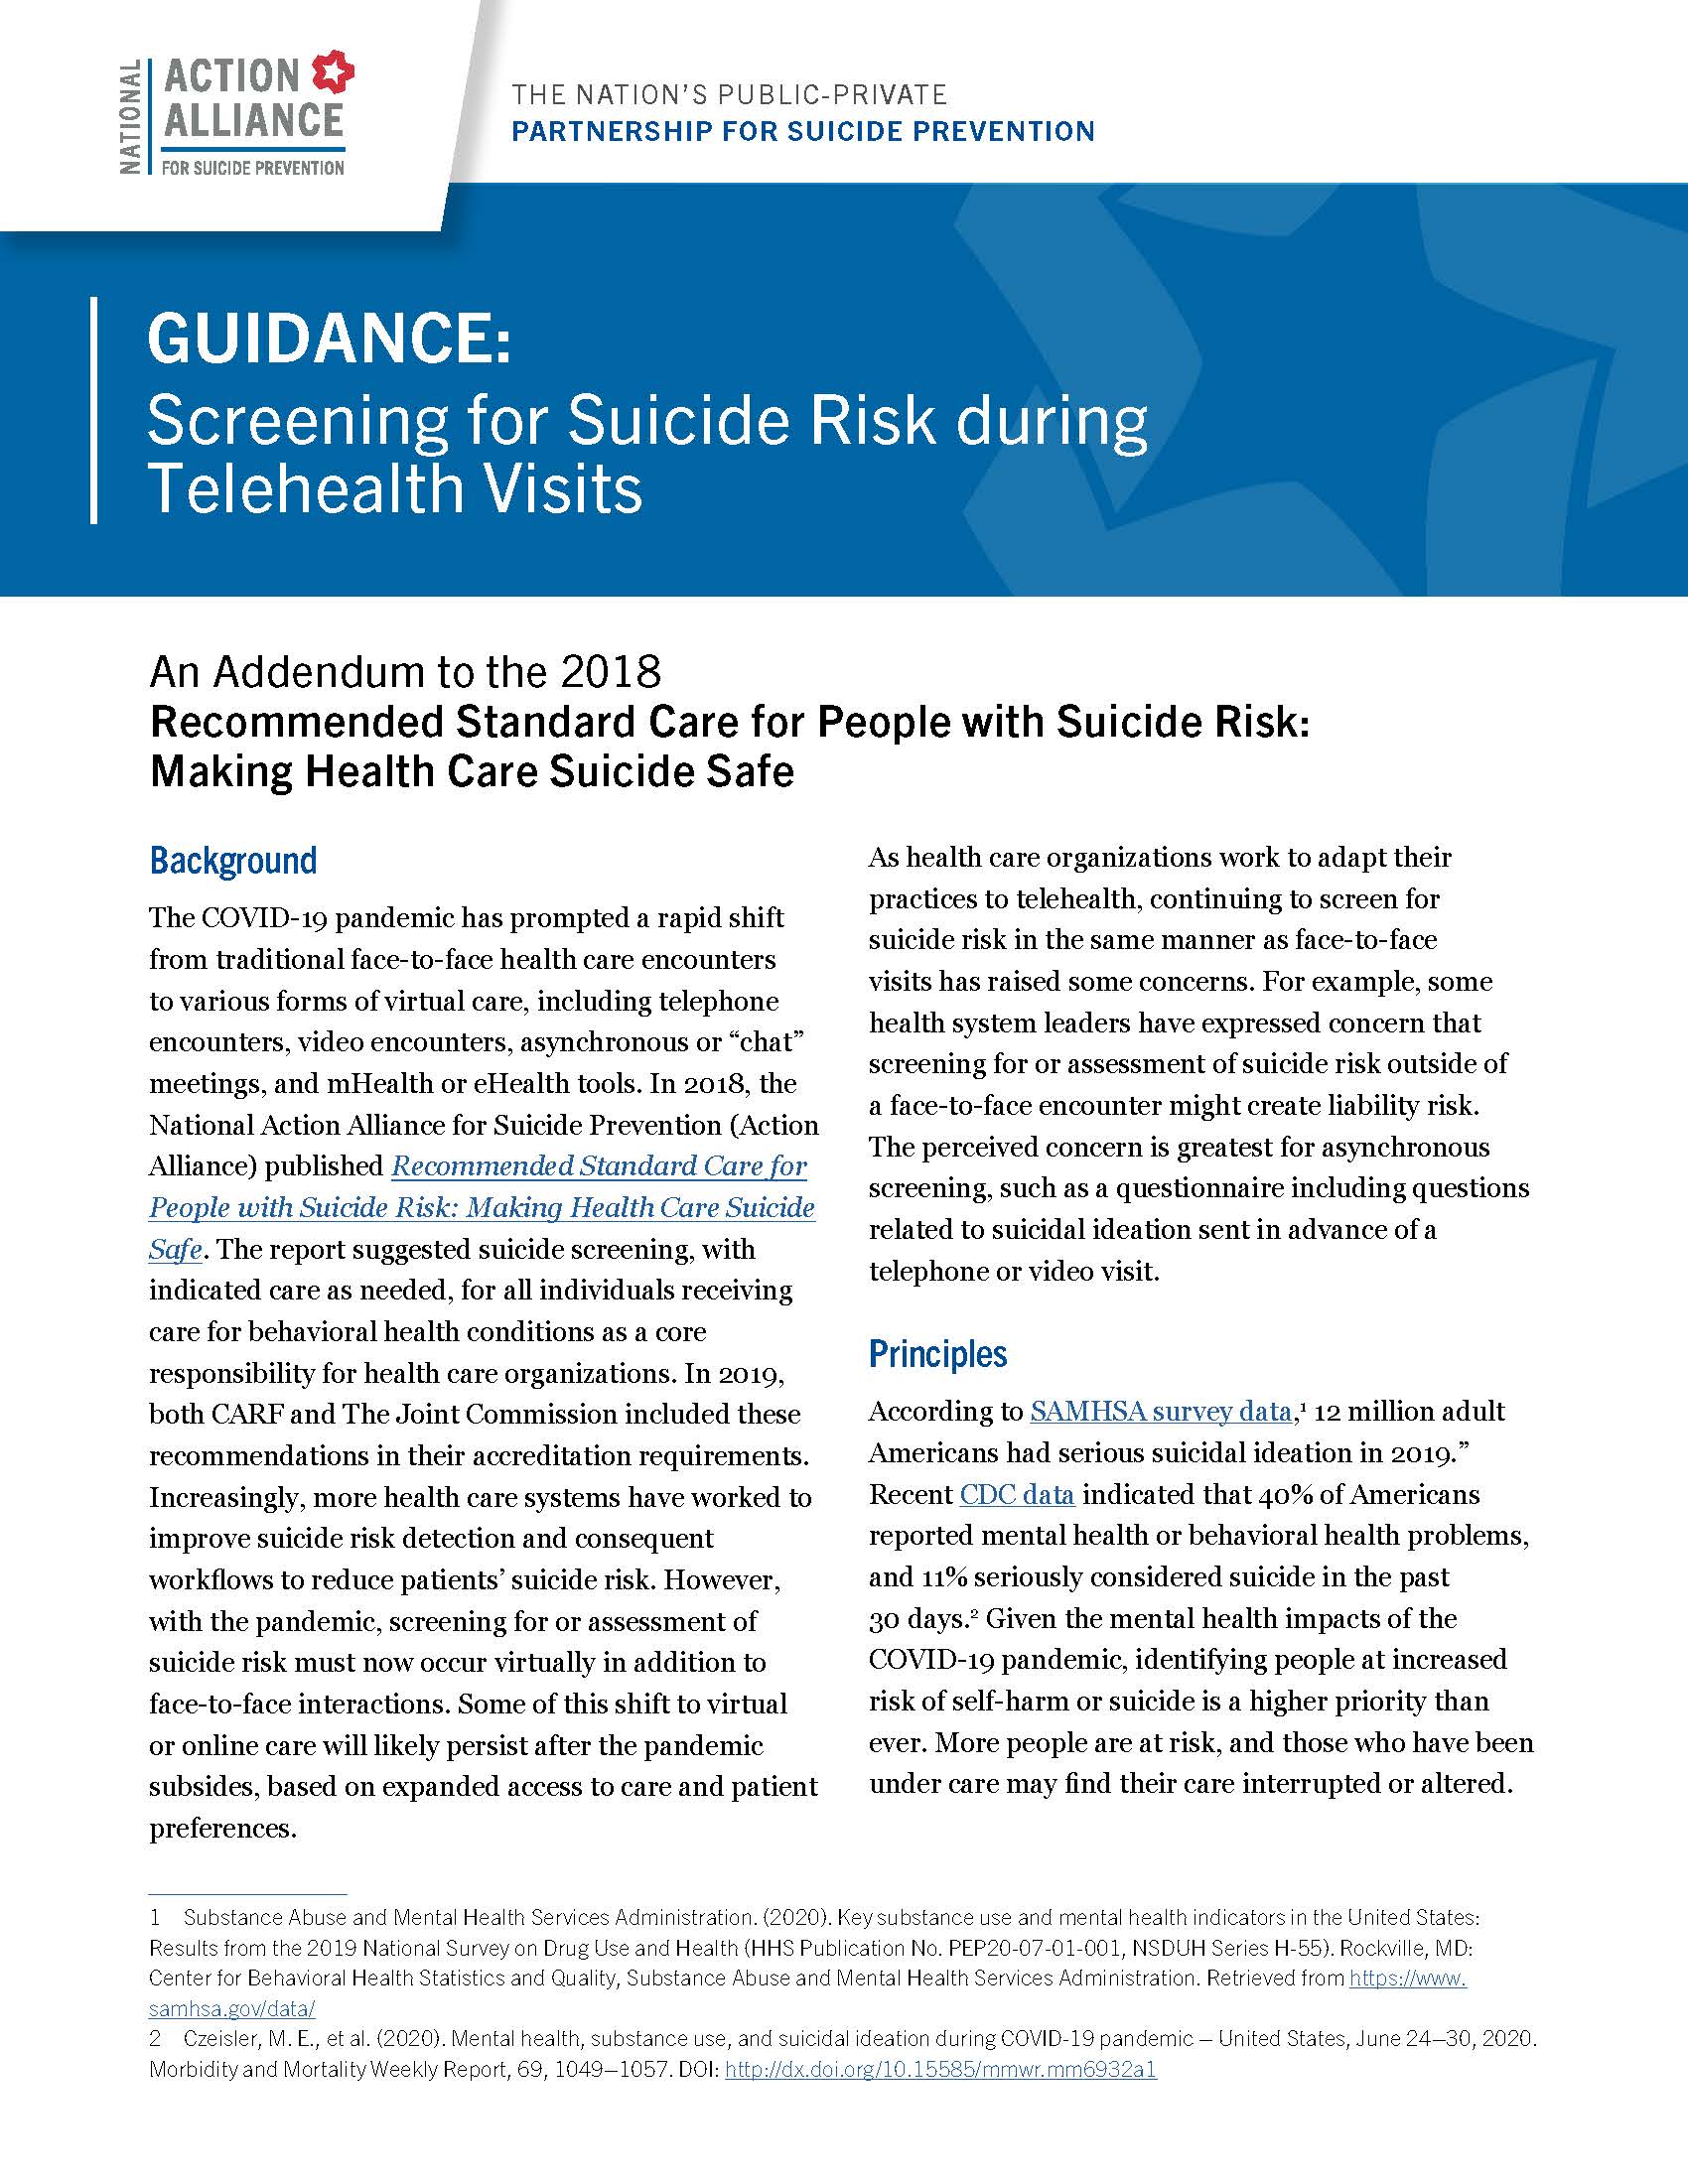 Guidance: Screening for Suicide Risk during Telehealth Visits